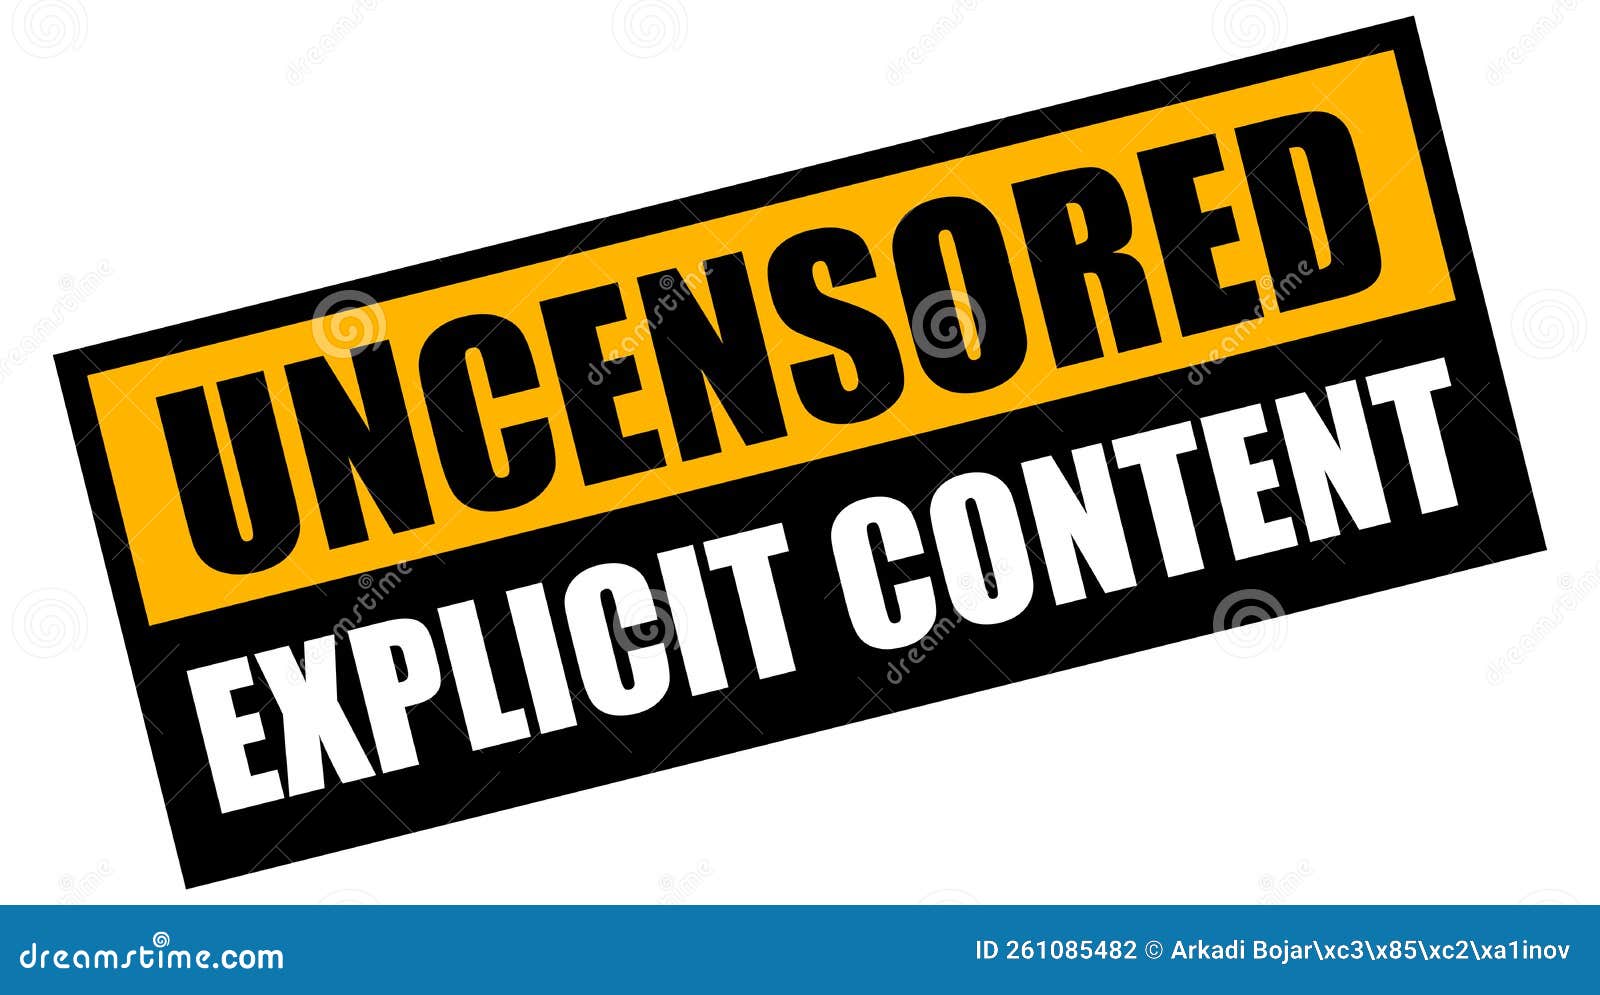 uncensored explicit content warning banner